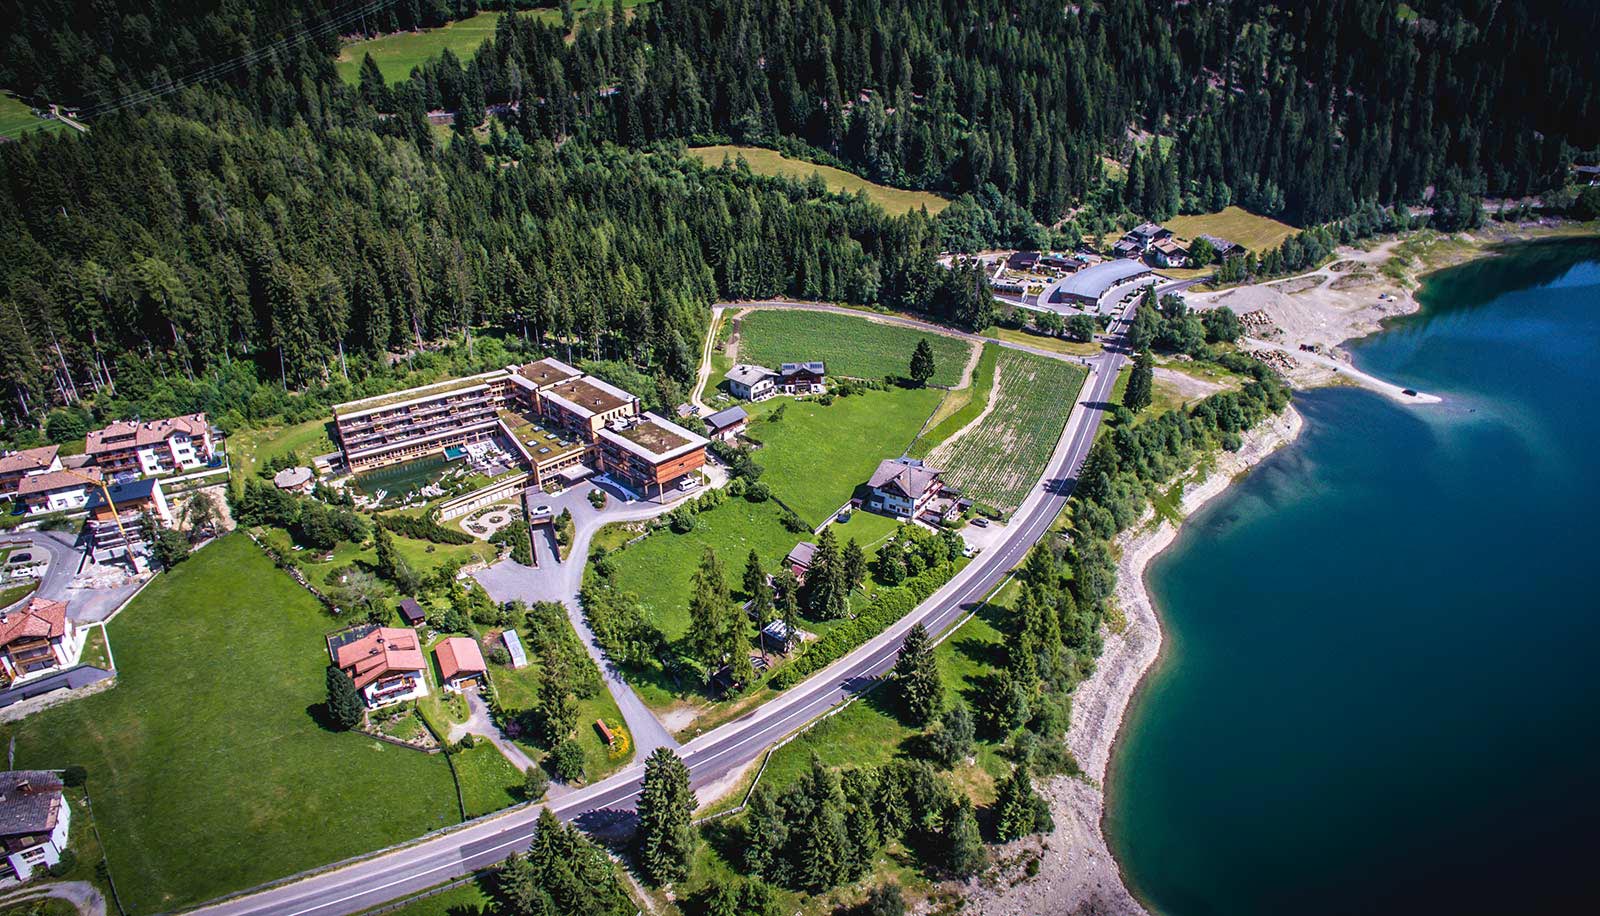 Arosea Hotel in Ultental-Val d'Ultimo on the shore of the lake seen from above